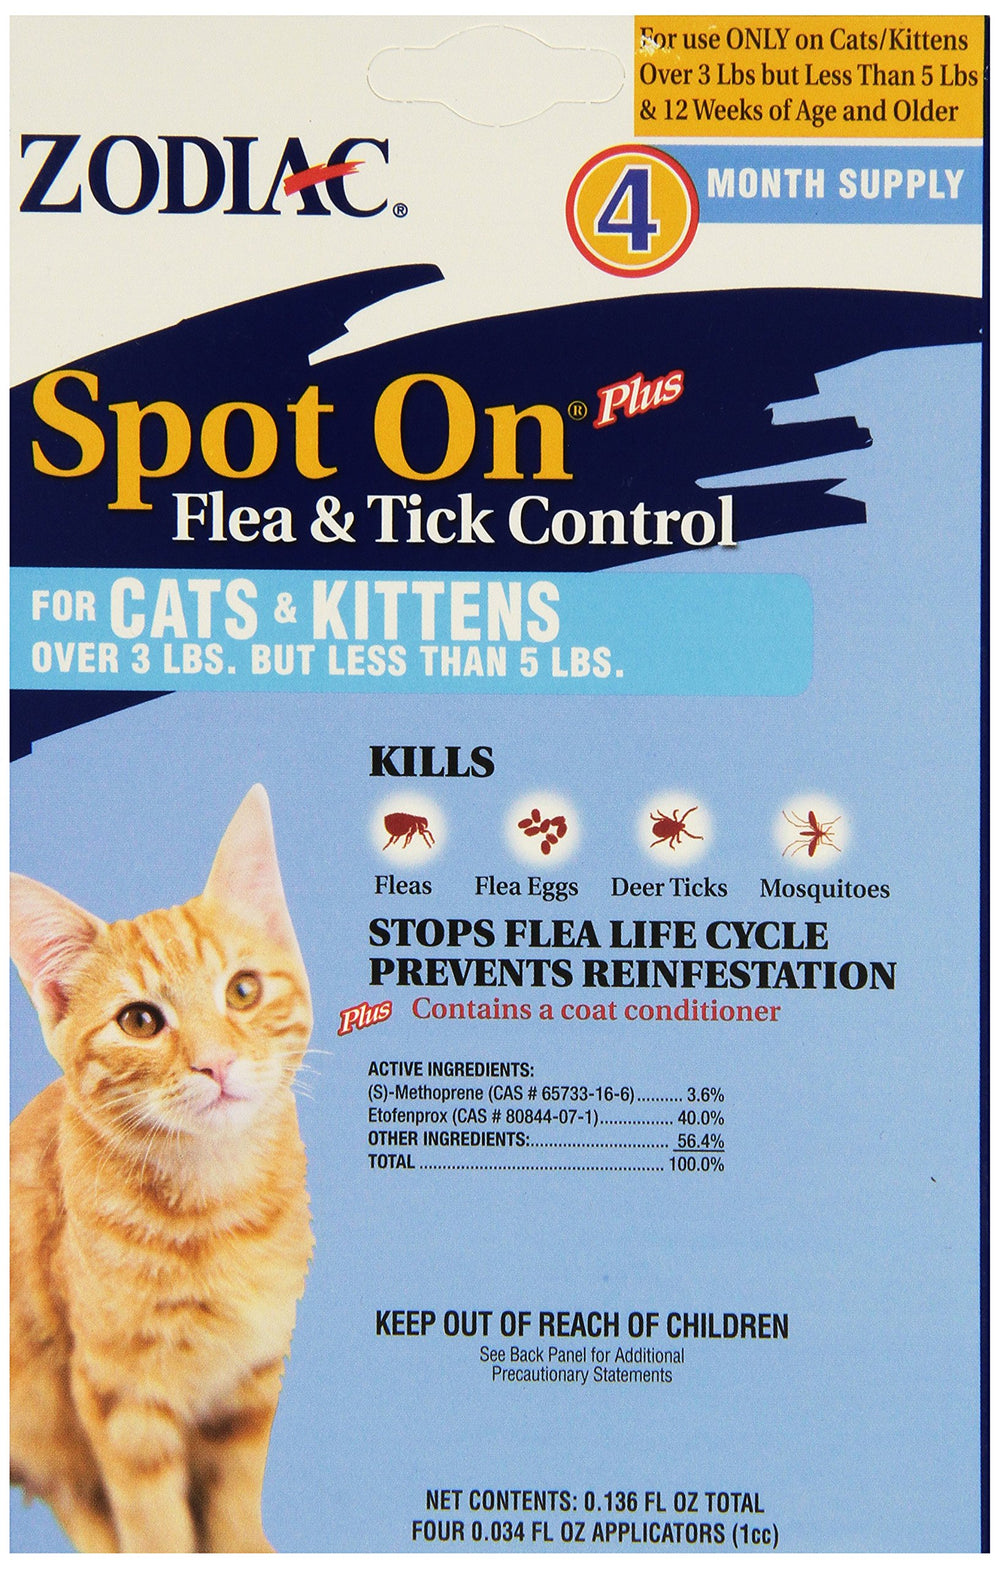 Zodiac Spot On for Cats and Kittens Under 5-Pounds, 4 Month Supply